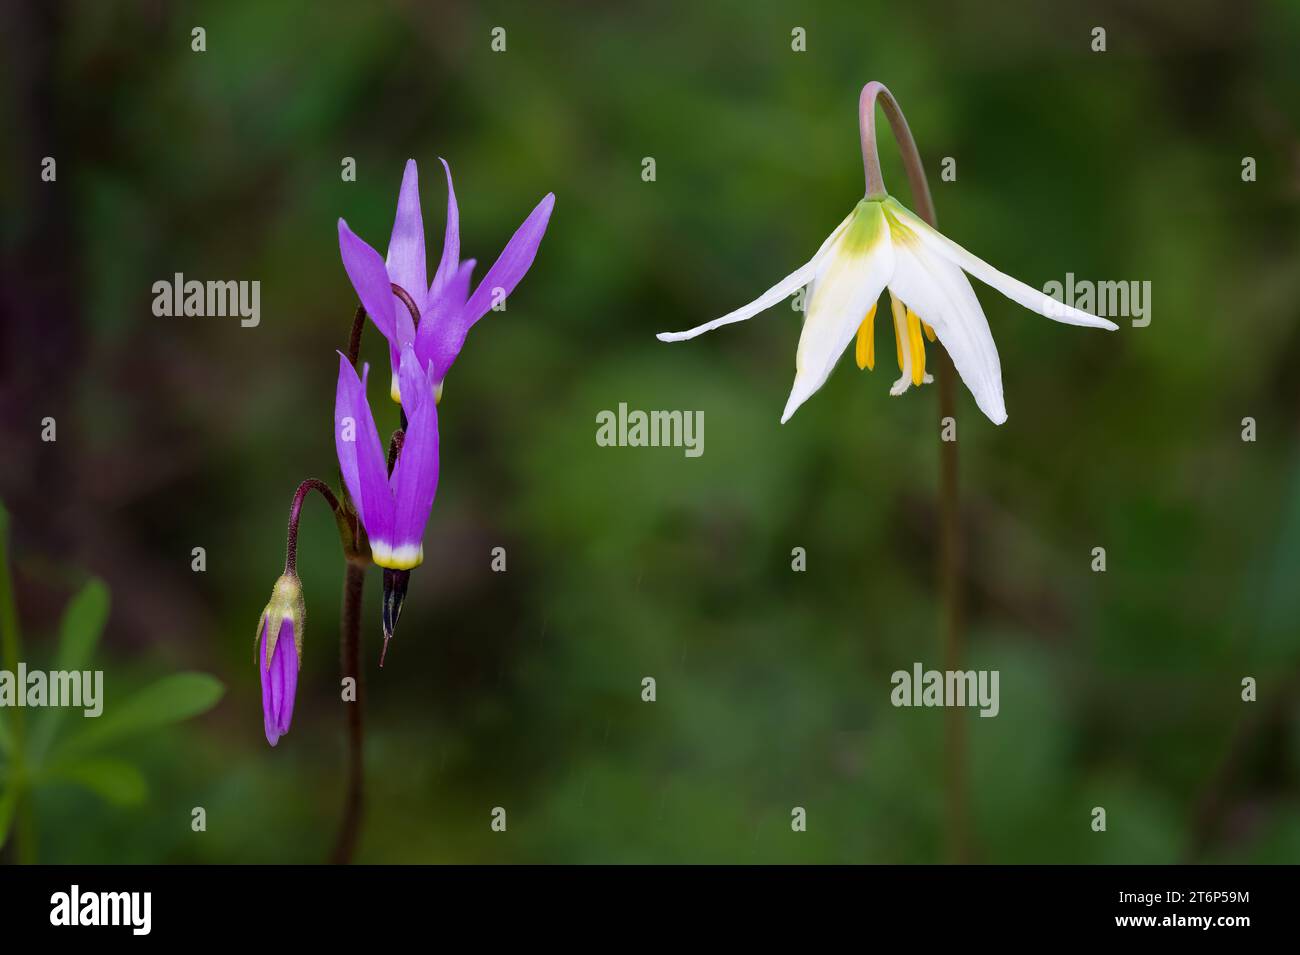 The Fawn Lily and Shooting Star wildflowers blooming in the Thetis Lake Regional Park, Vancouver Island, British Columbia, Canada. Stock Photo